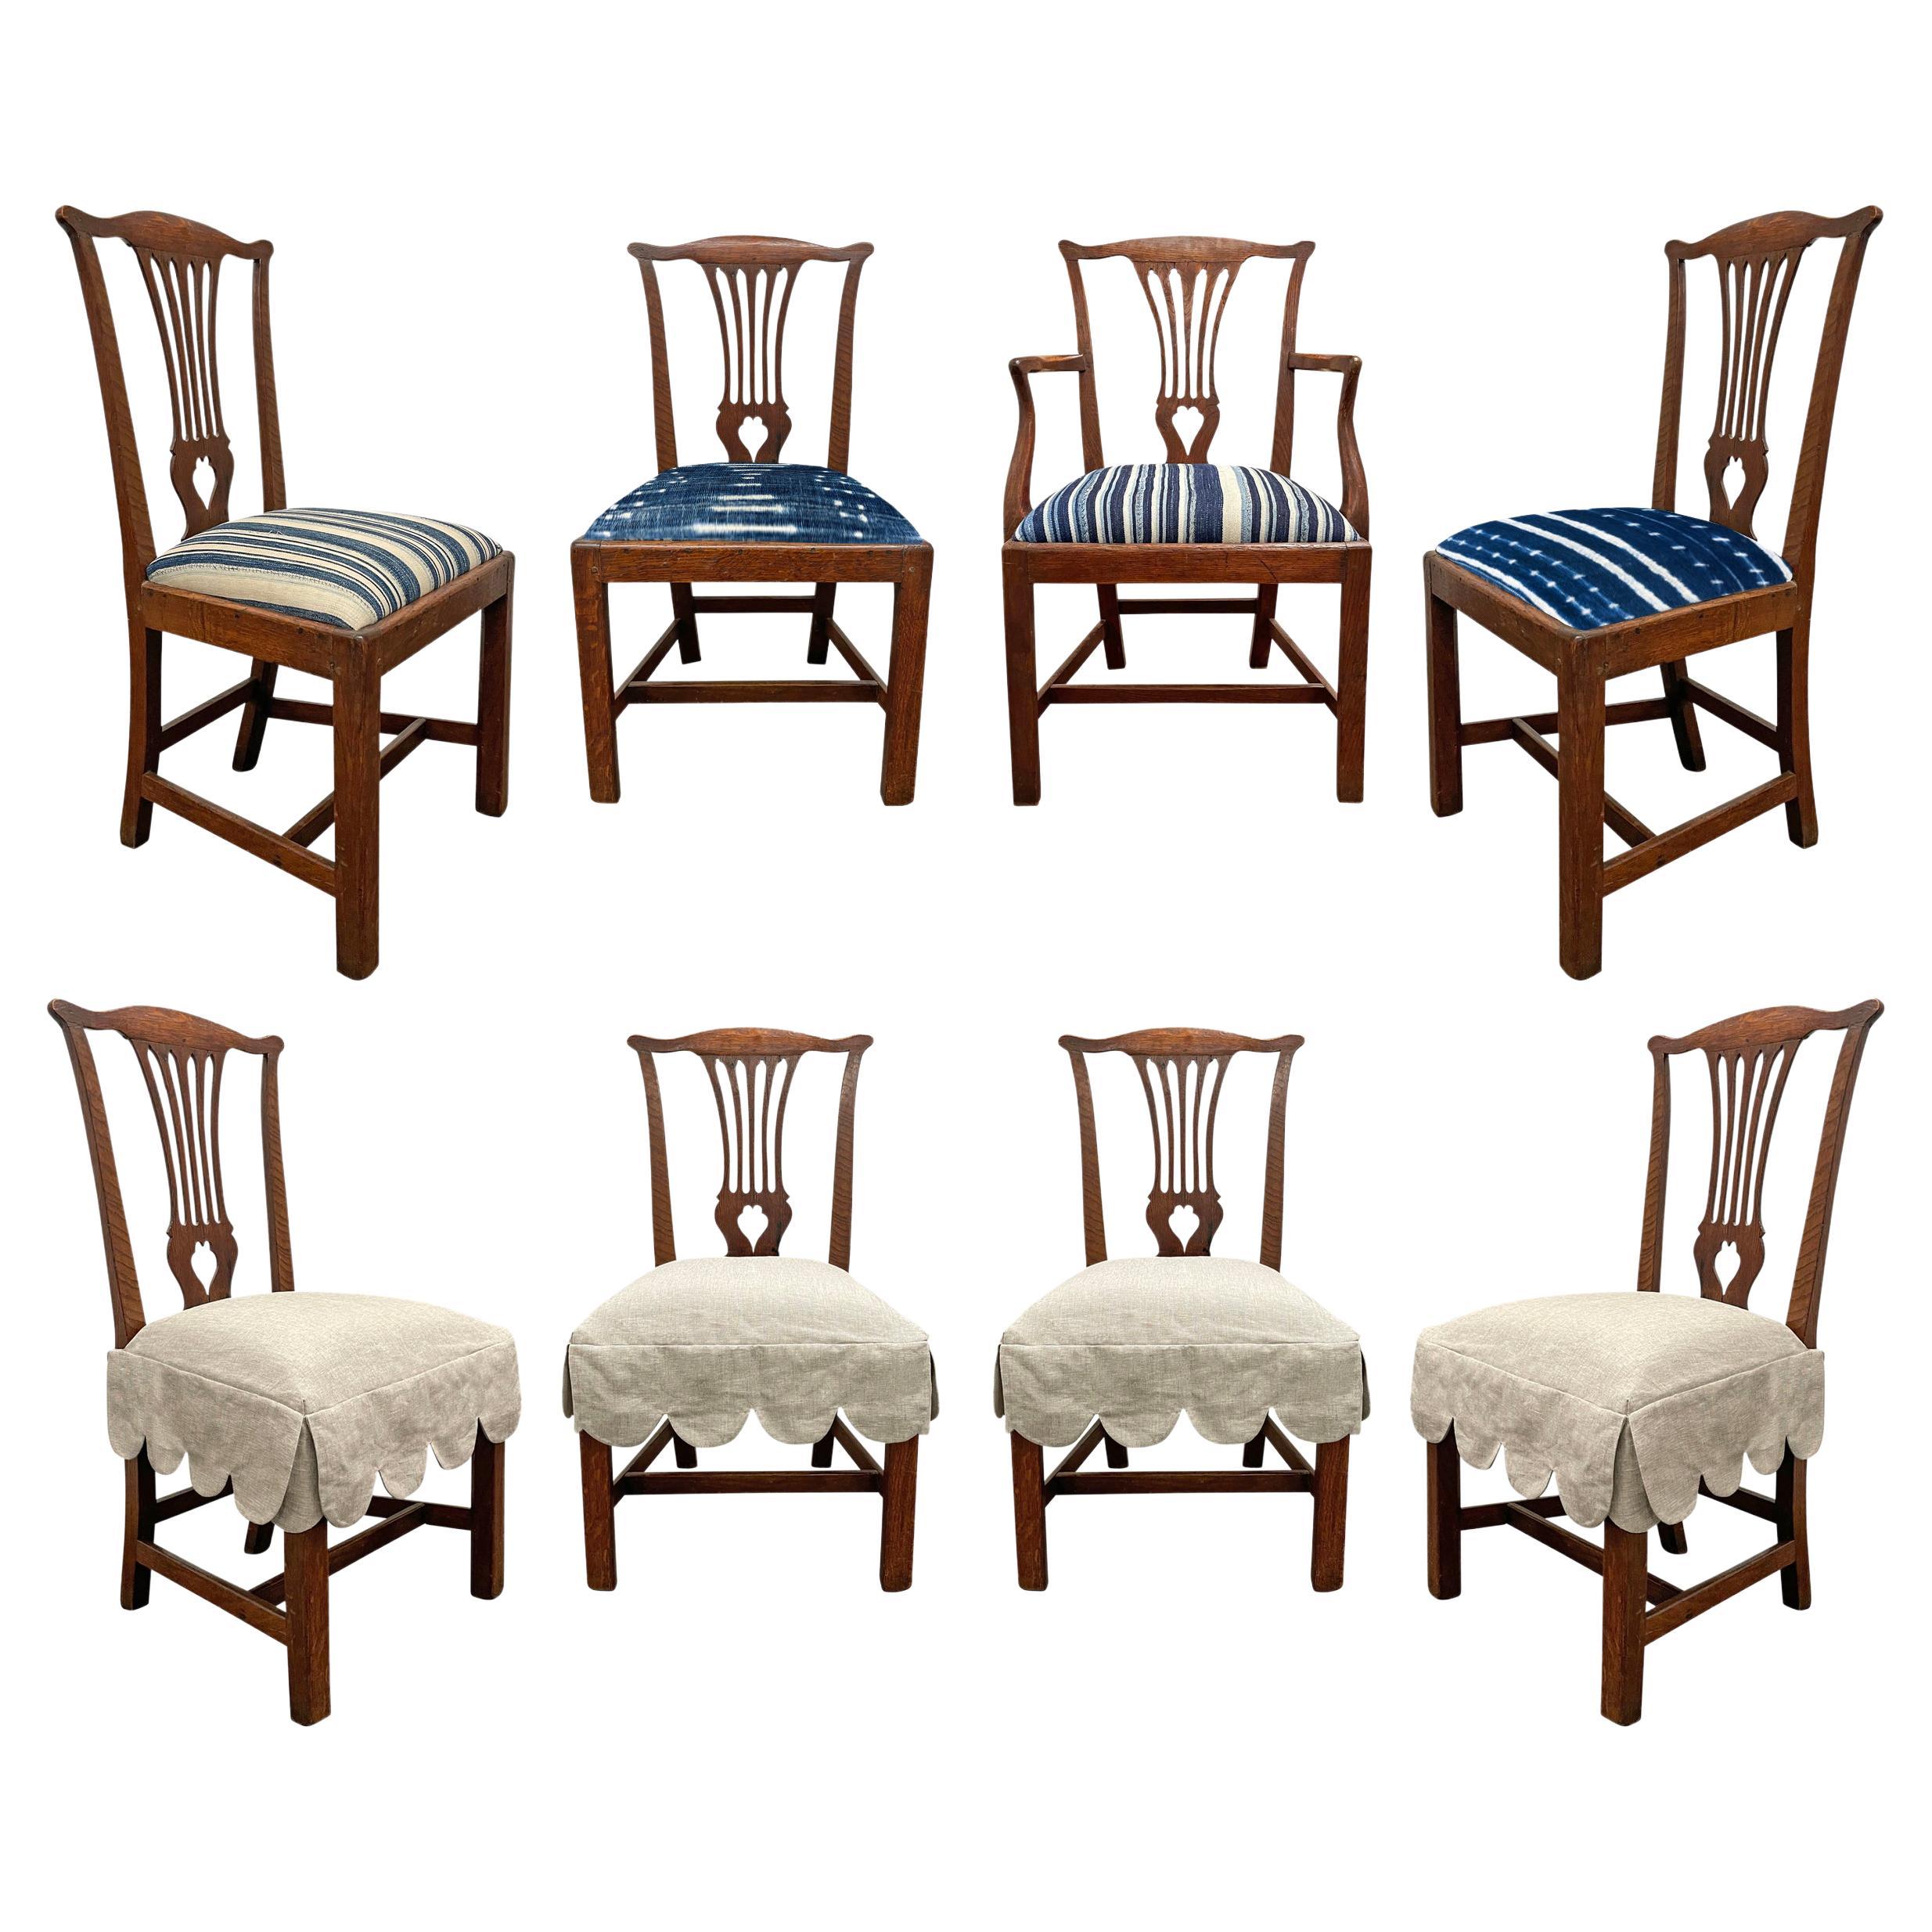 Set of Eight 18th Century Chippendale Dining Chairs with Custom Slipcovers